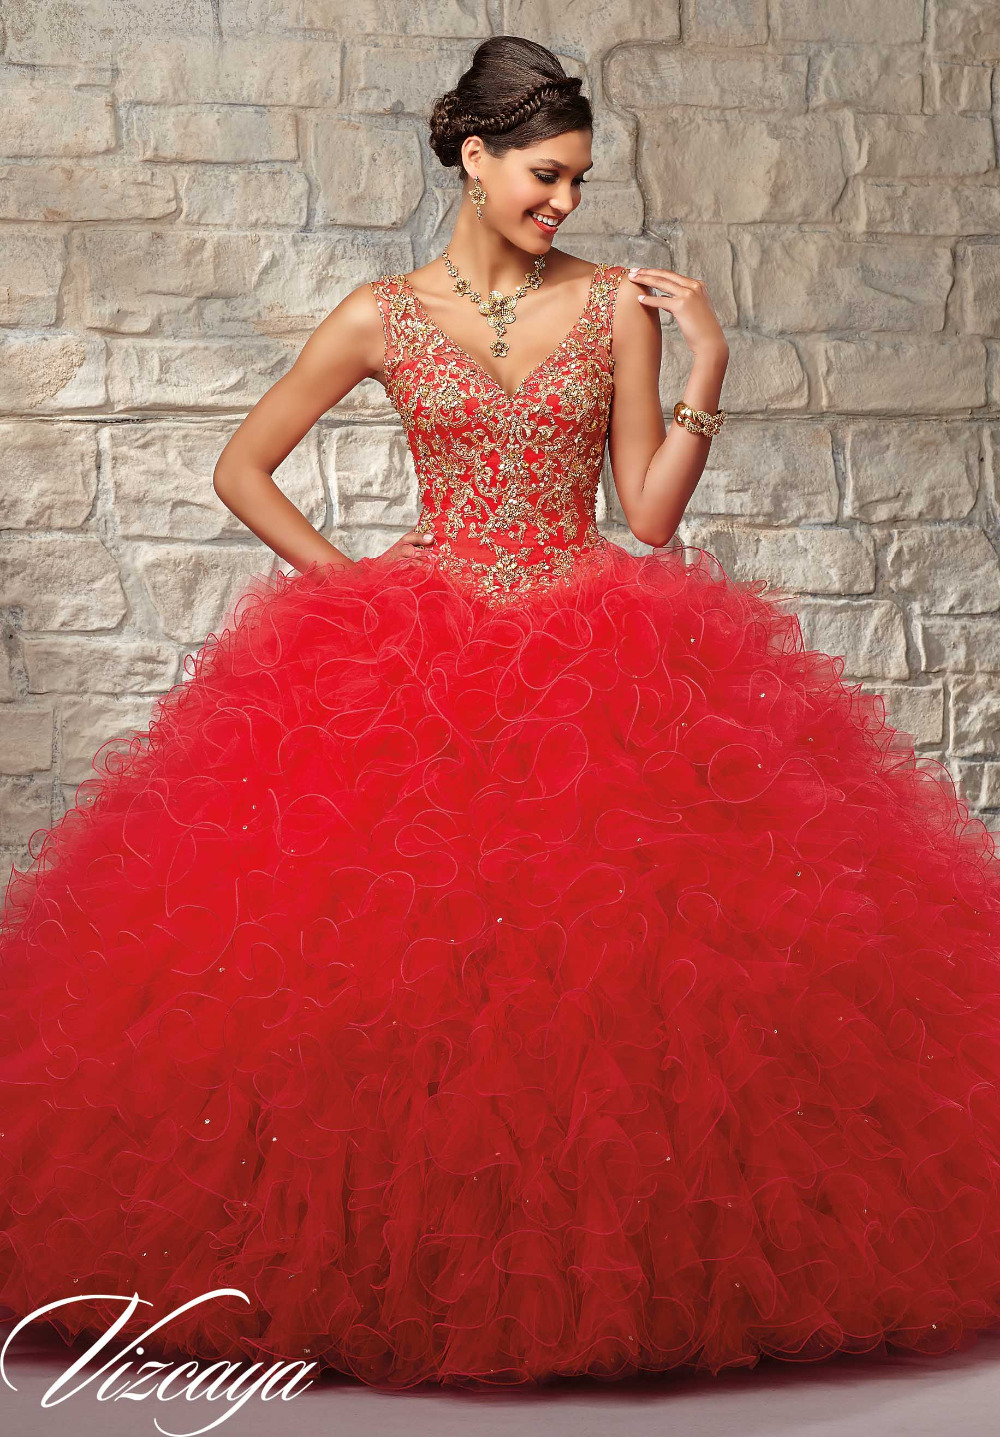 Popular Coral Quinceanera Dresses Buy Cheap Coral Quinceanera Dresses Lots From China Coral